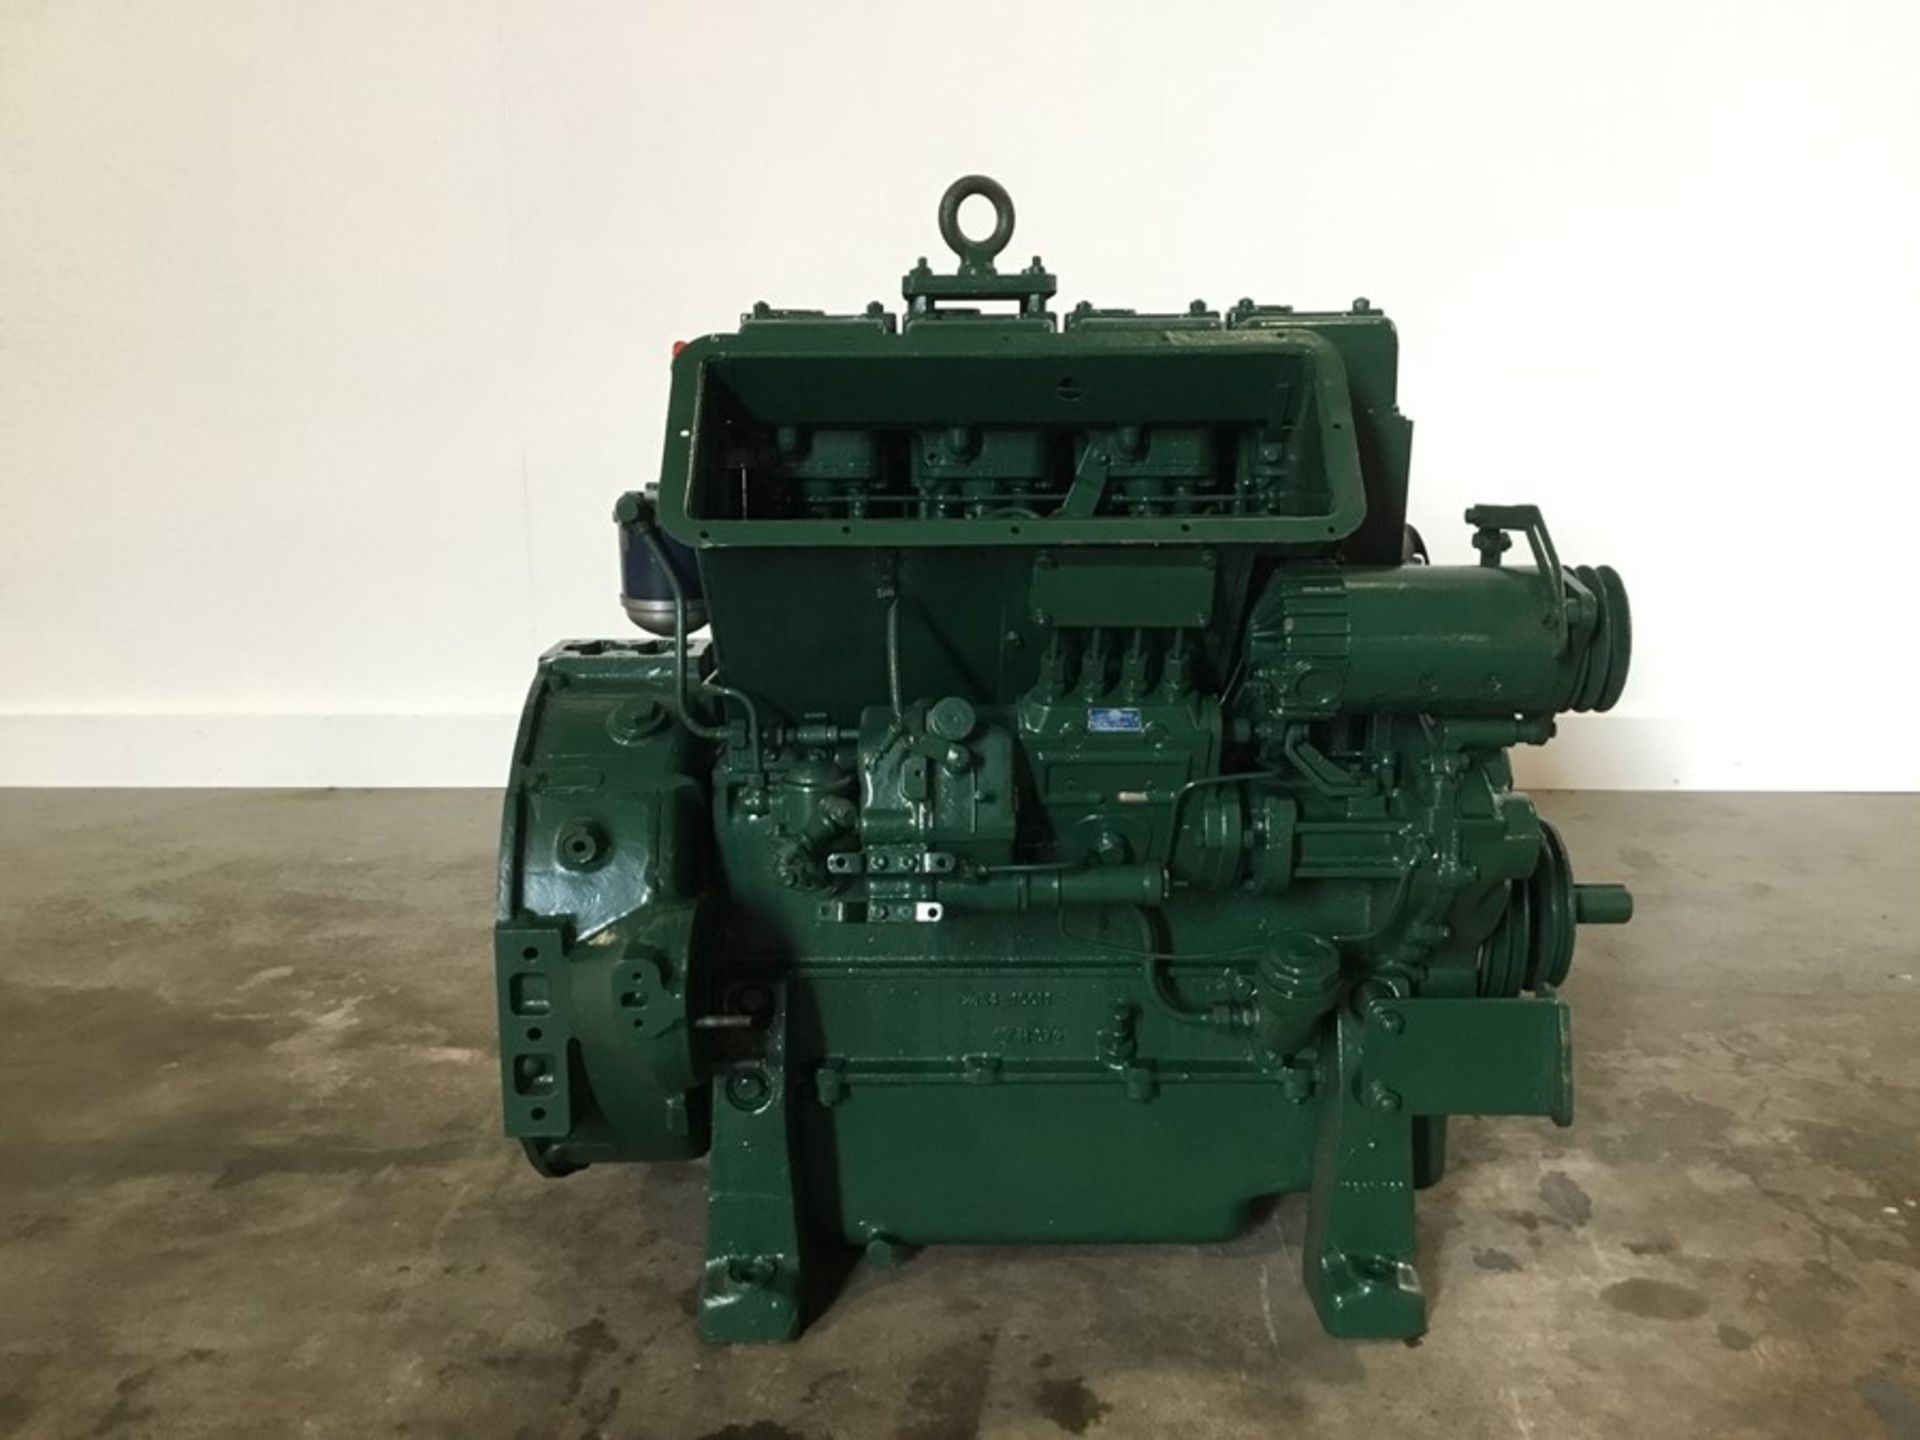 Lister 4cyl Diesel Engine: Lister 4cyl non turbo low hours - Image 18 of 18